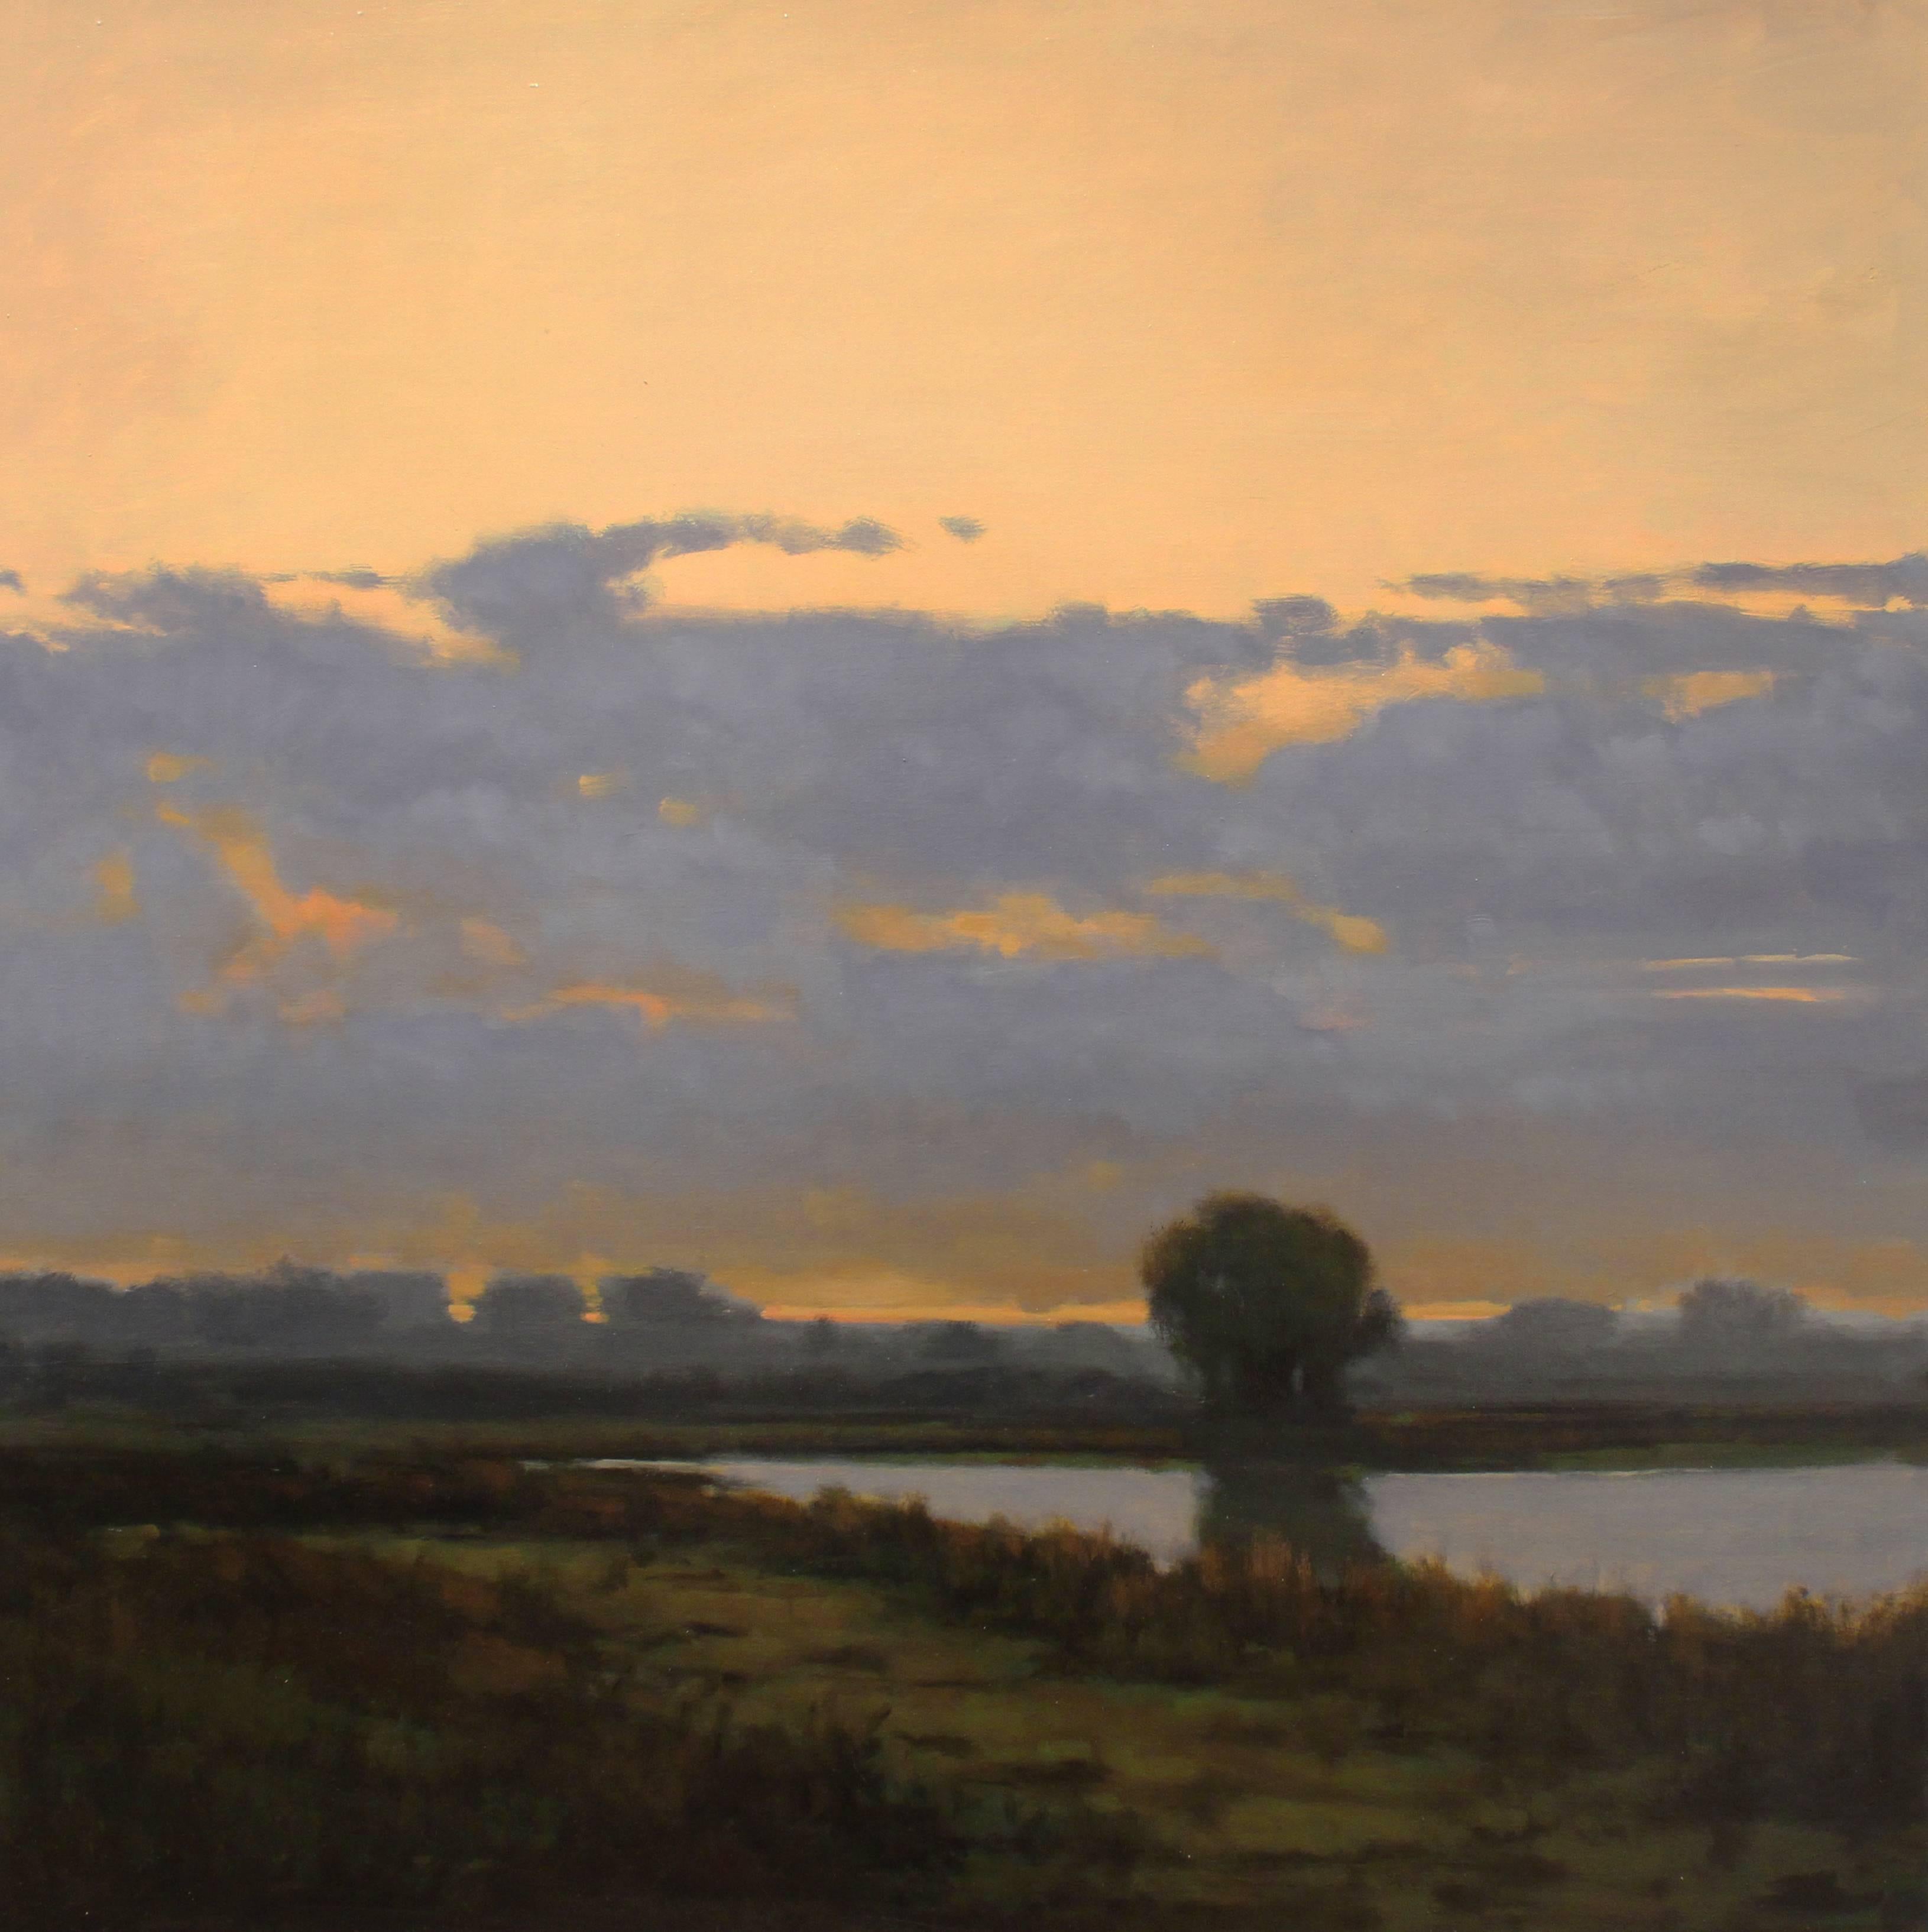 John McCormick is a Northern California painter who creates luminous landscapes of vast vistas featuring wetlands, hills and valleys, and the sea. His oil paintings convey a sense of the sublime in nature. Using finely tuned compositional elements,